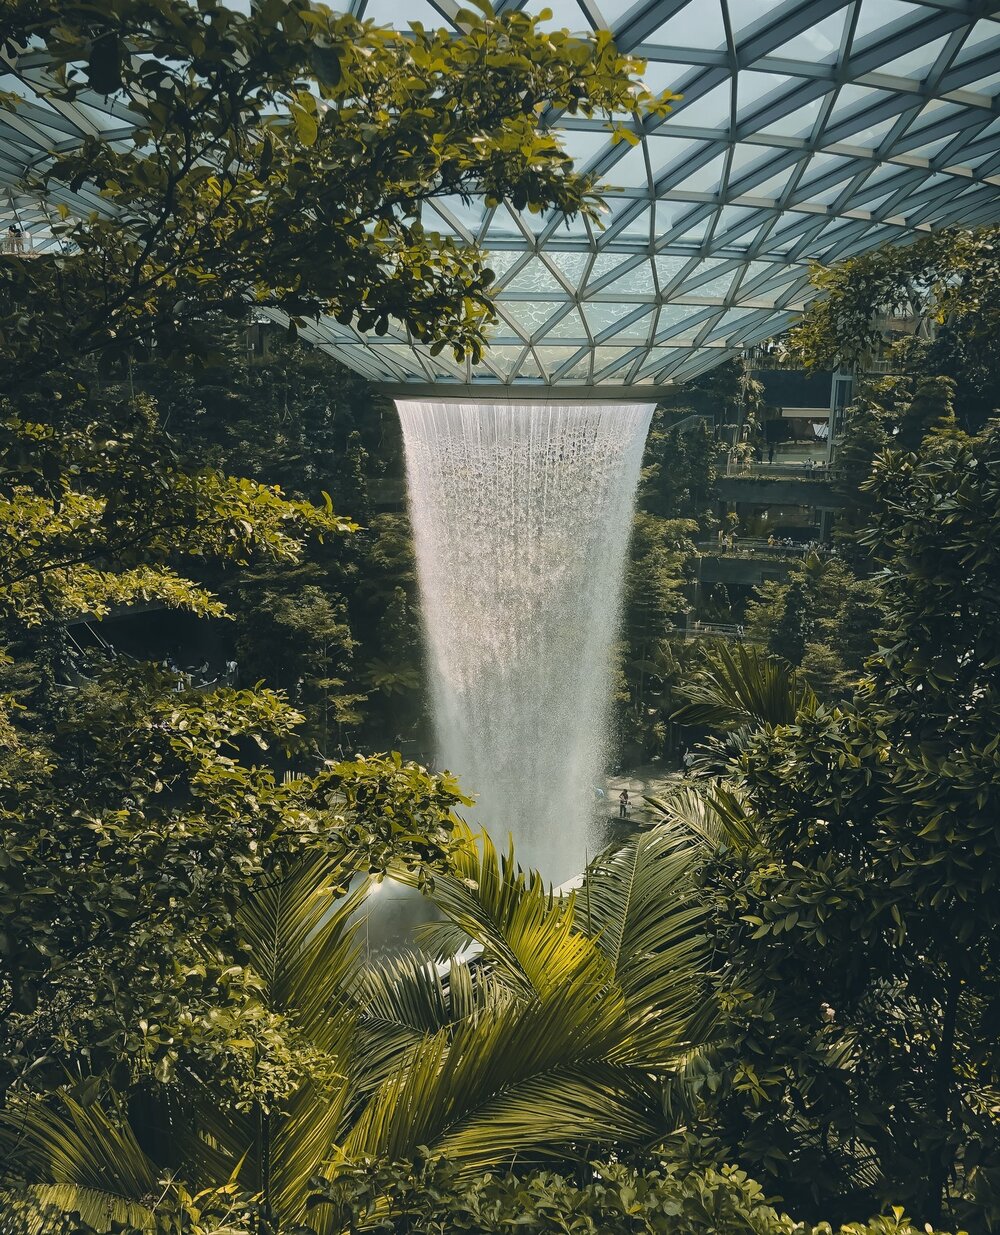 The Jewel - a giant mall and waterfall at Singapore's Changi Airport. Not without reason, Singapore's Changi Airport is one of the world's most popular and well-known airports. In addition to the famous waterfall in The Jewel, you can kill time durin